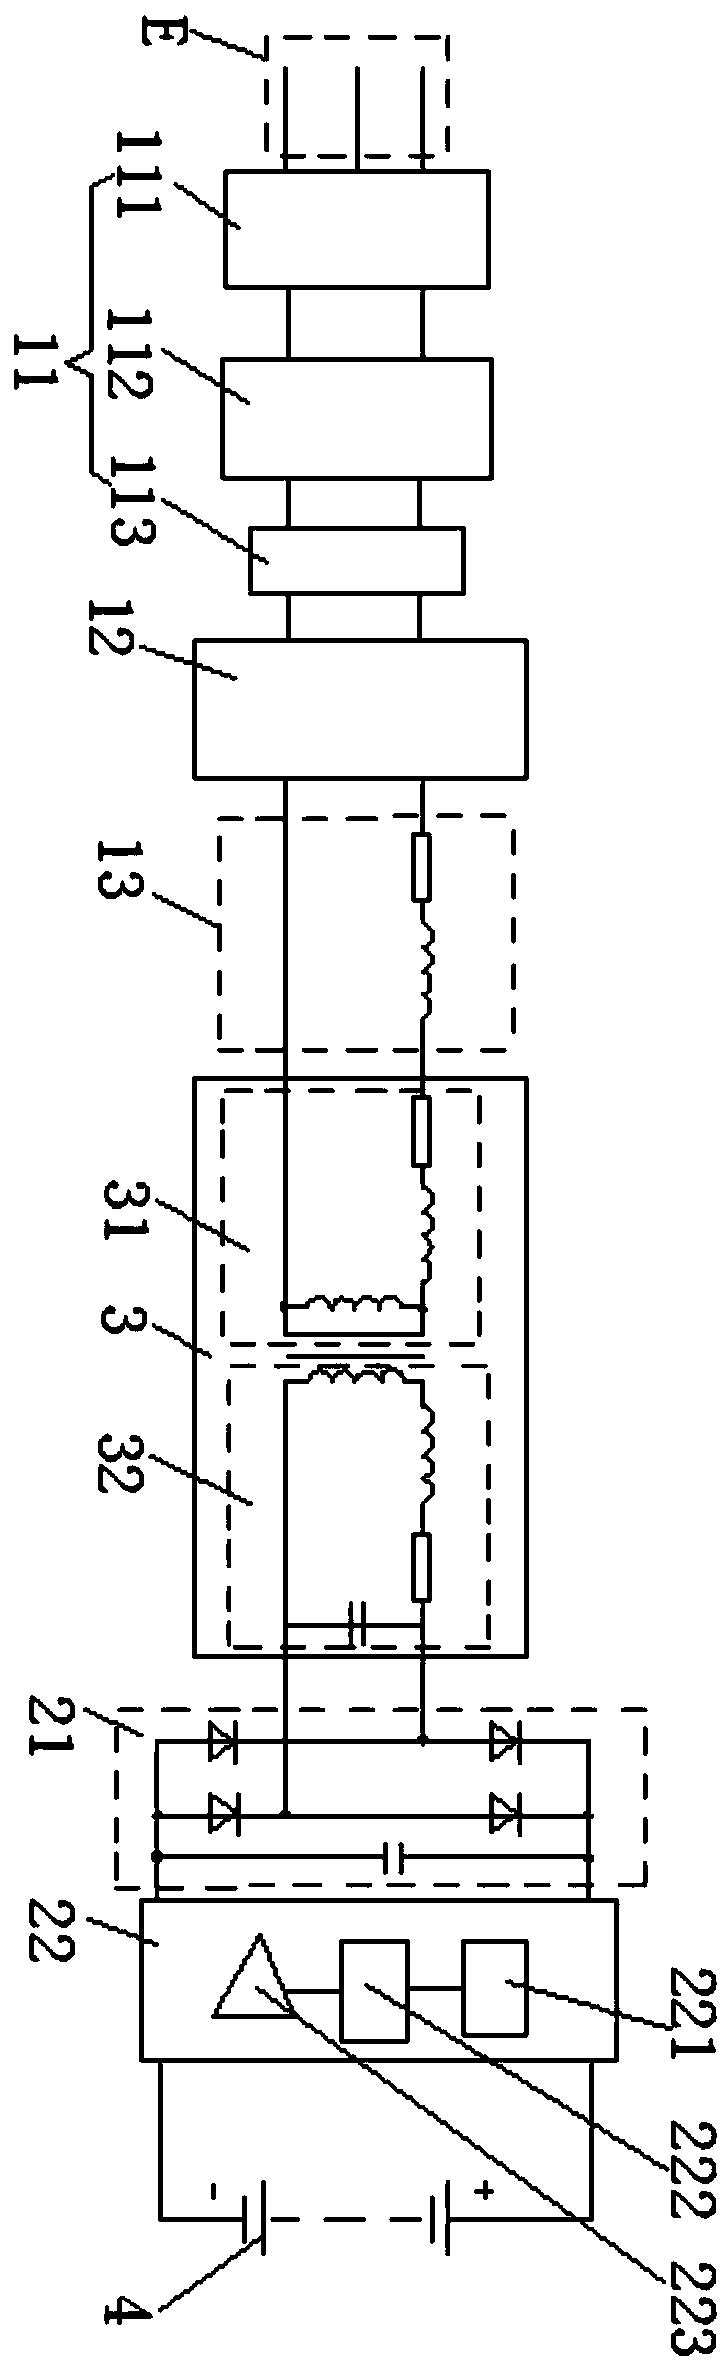 An inductive charging circuit for an electric vehicle